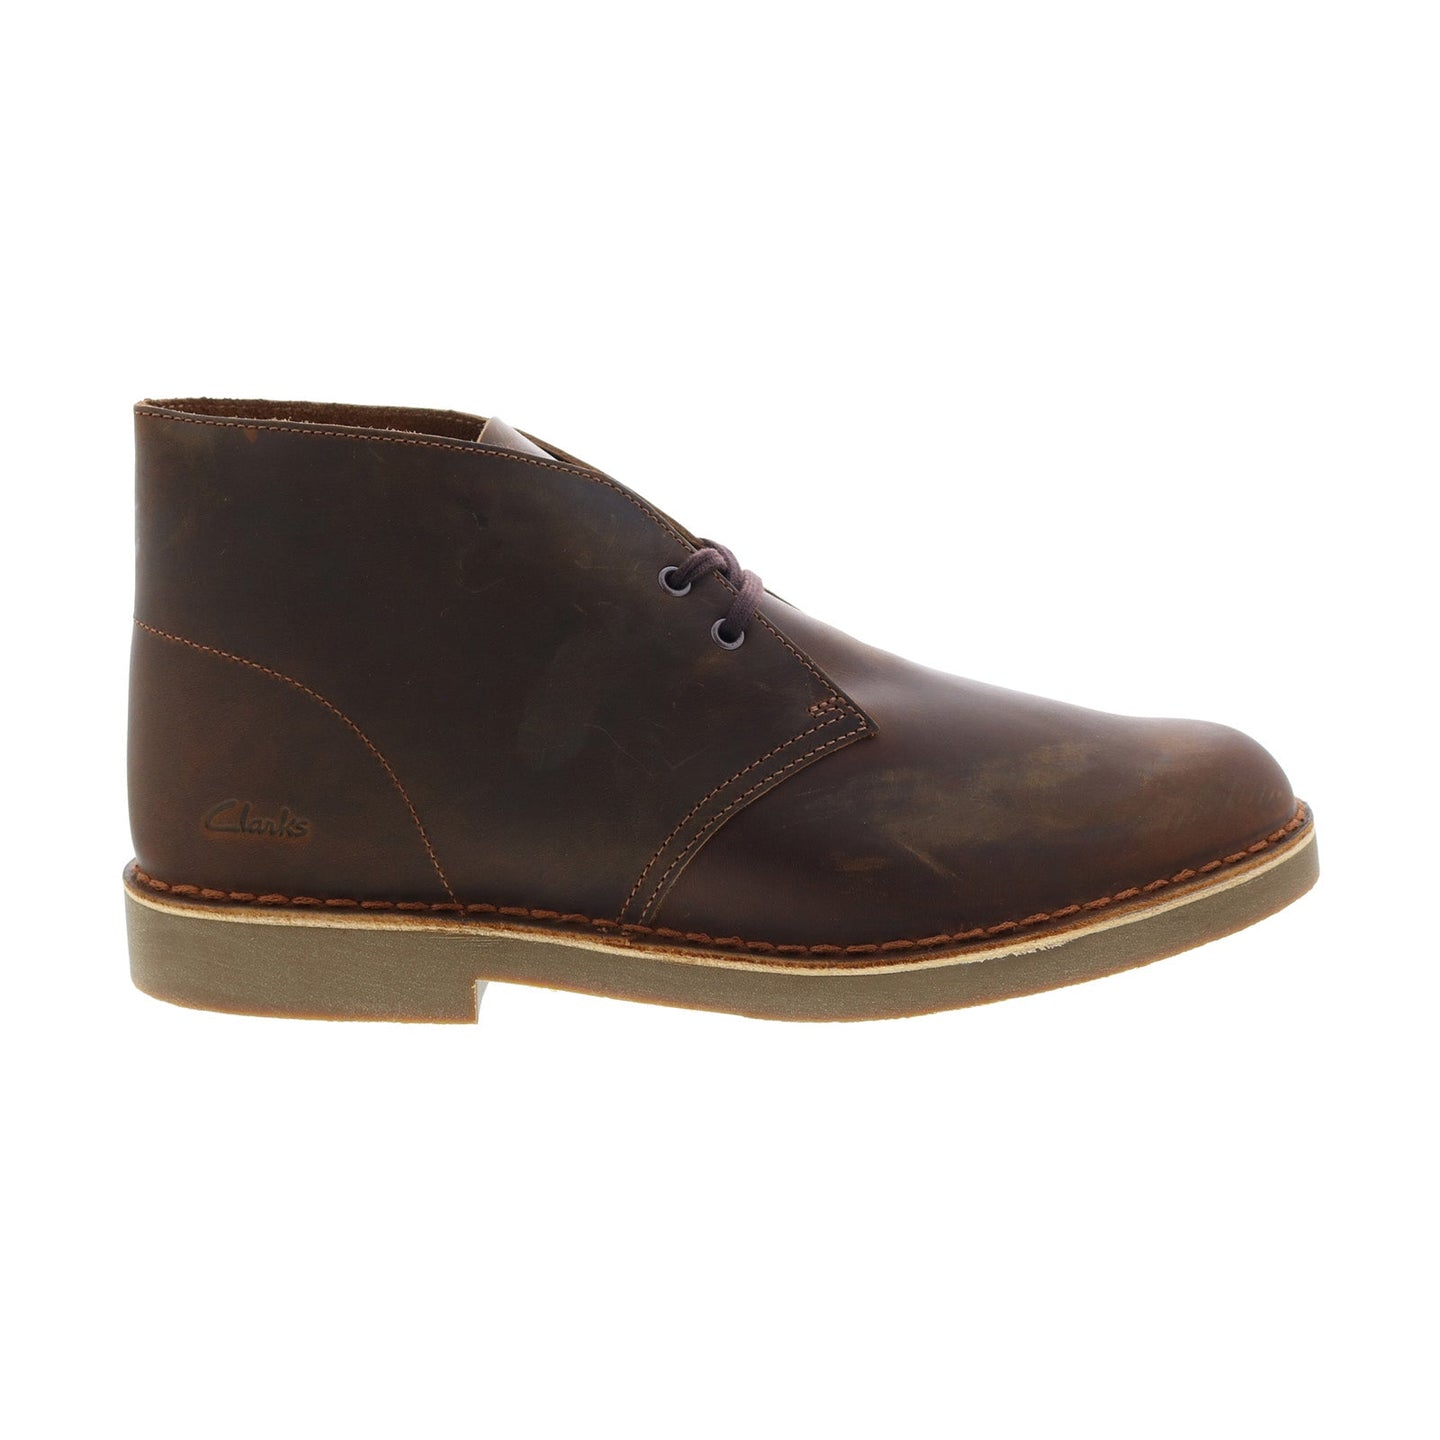 Clarks Desert Boot 2 26155498 Mens Brown Wide Leather Lace Up Chukkas ...